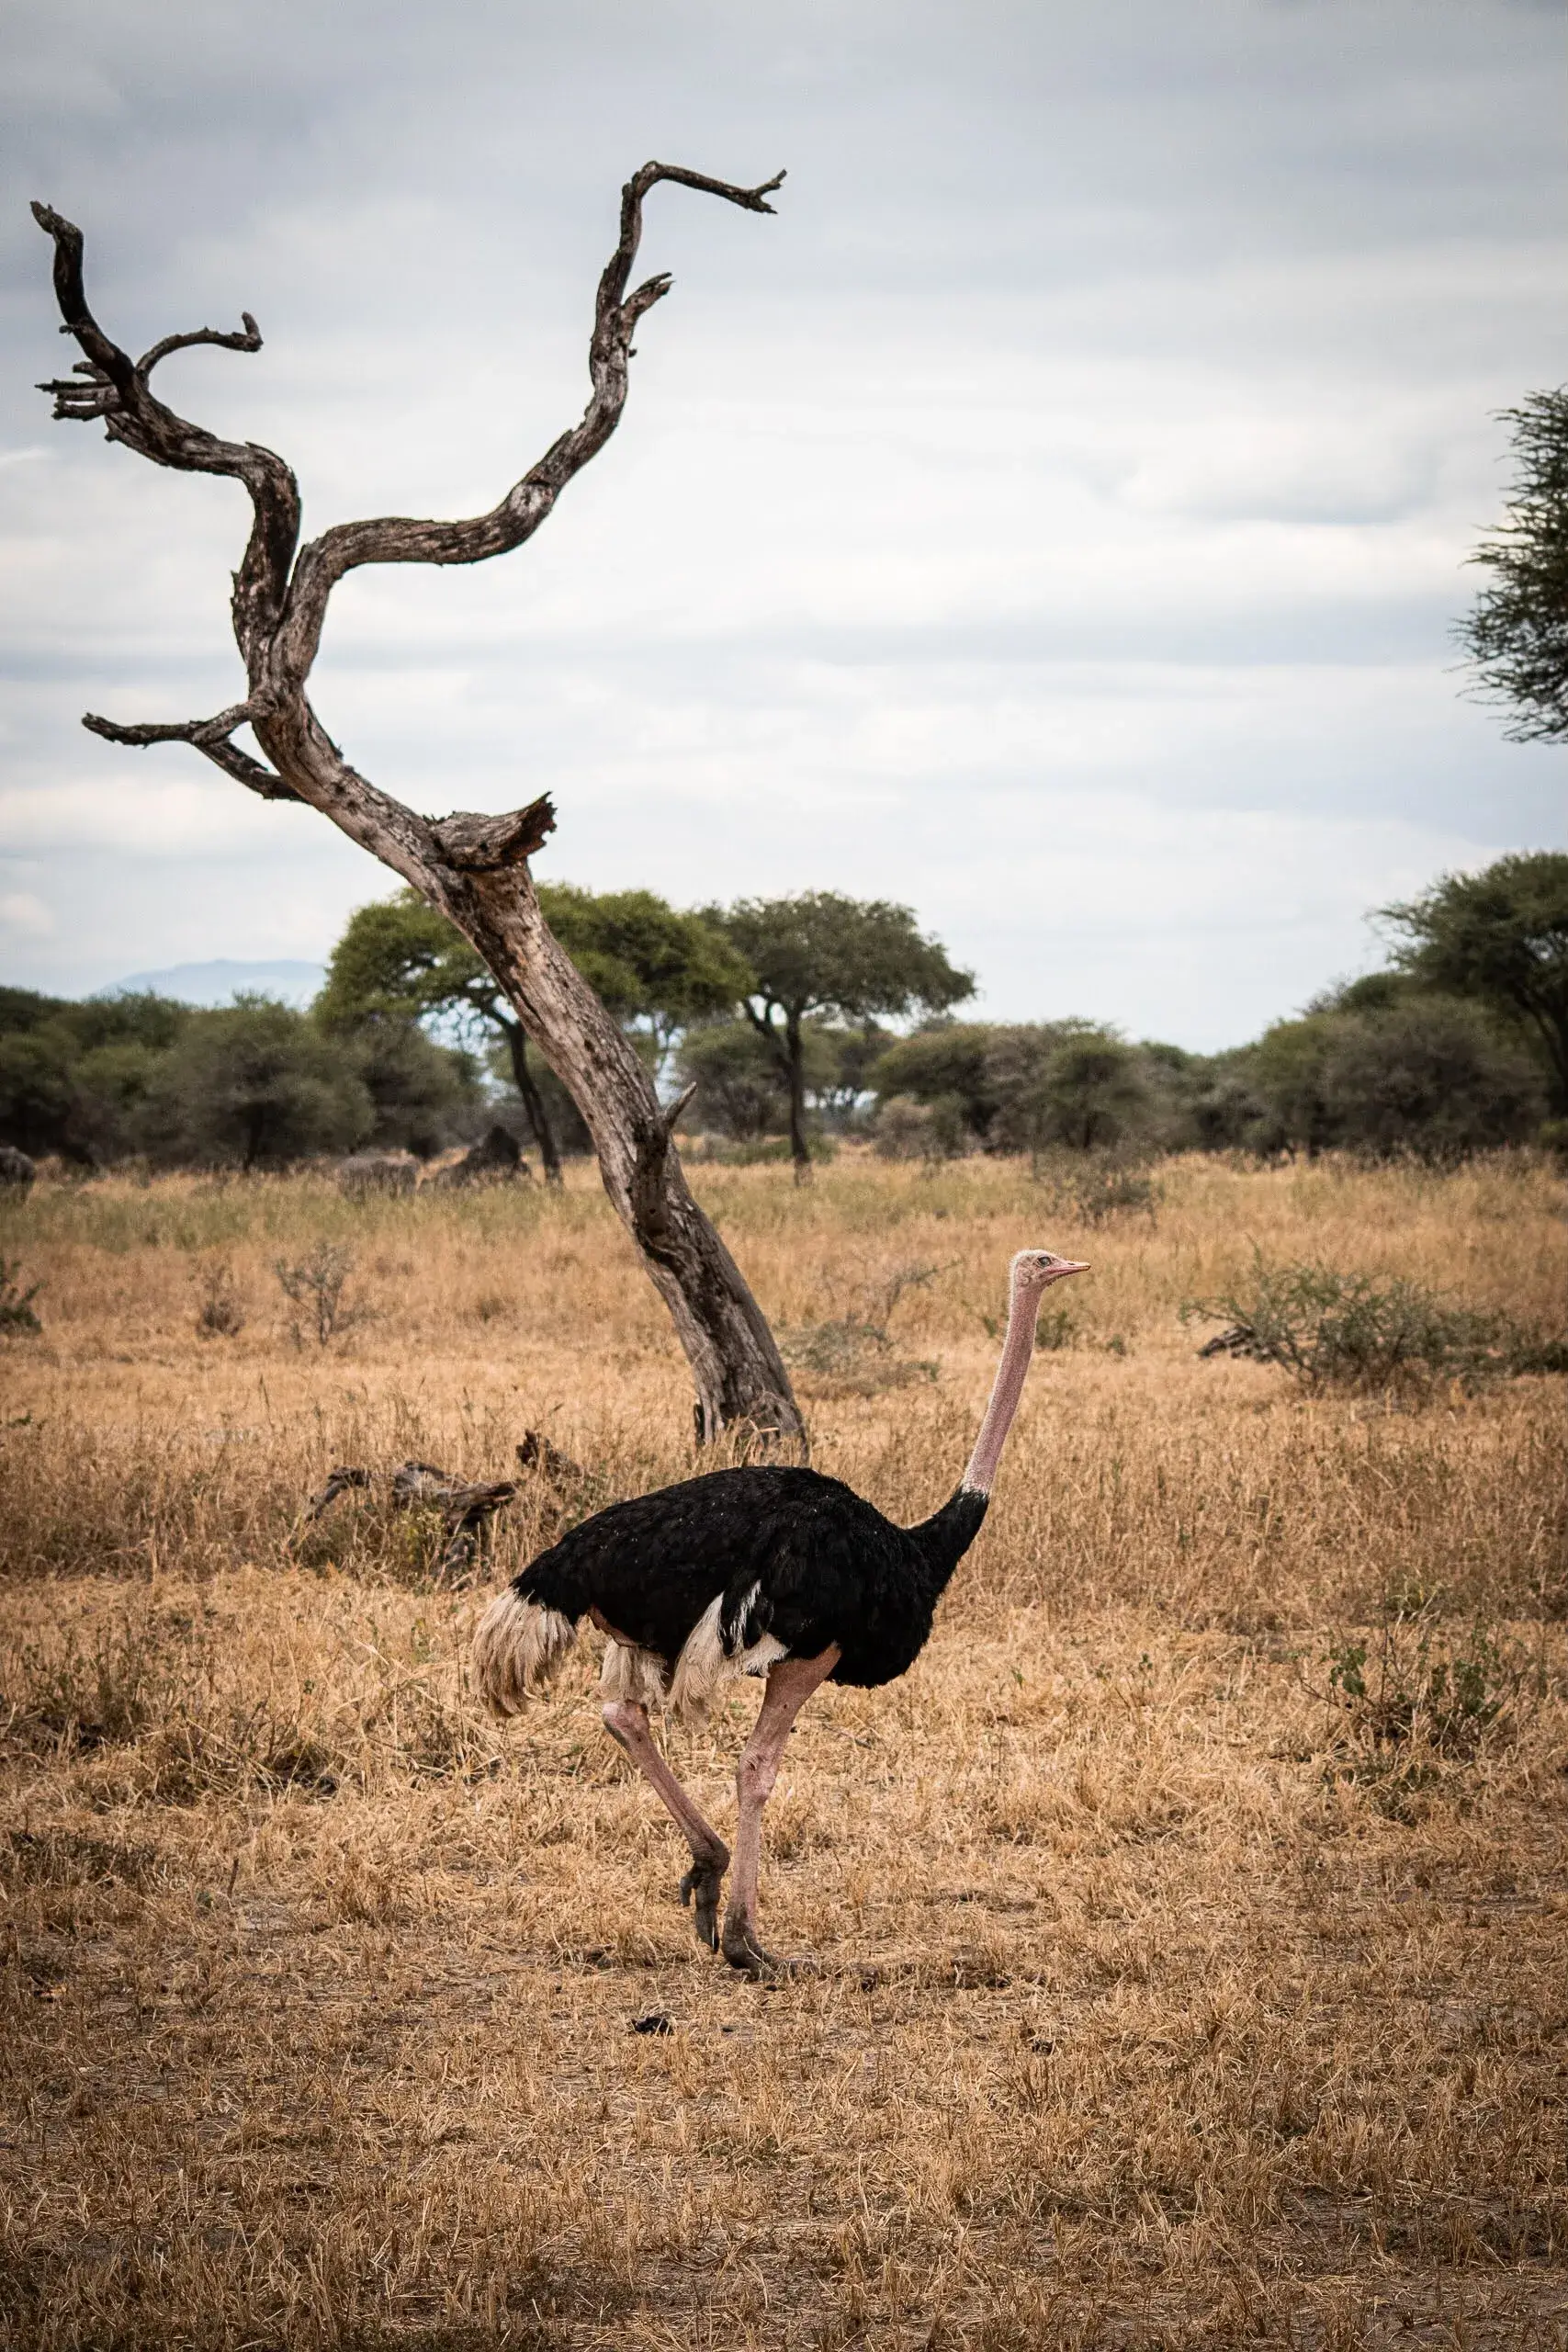 Ostrich spotted while hiking Kilimanjaro